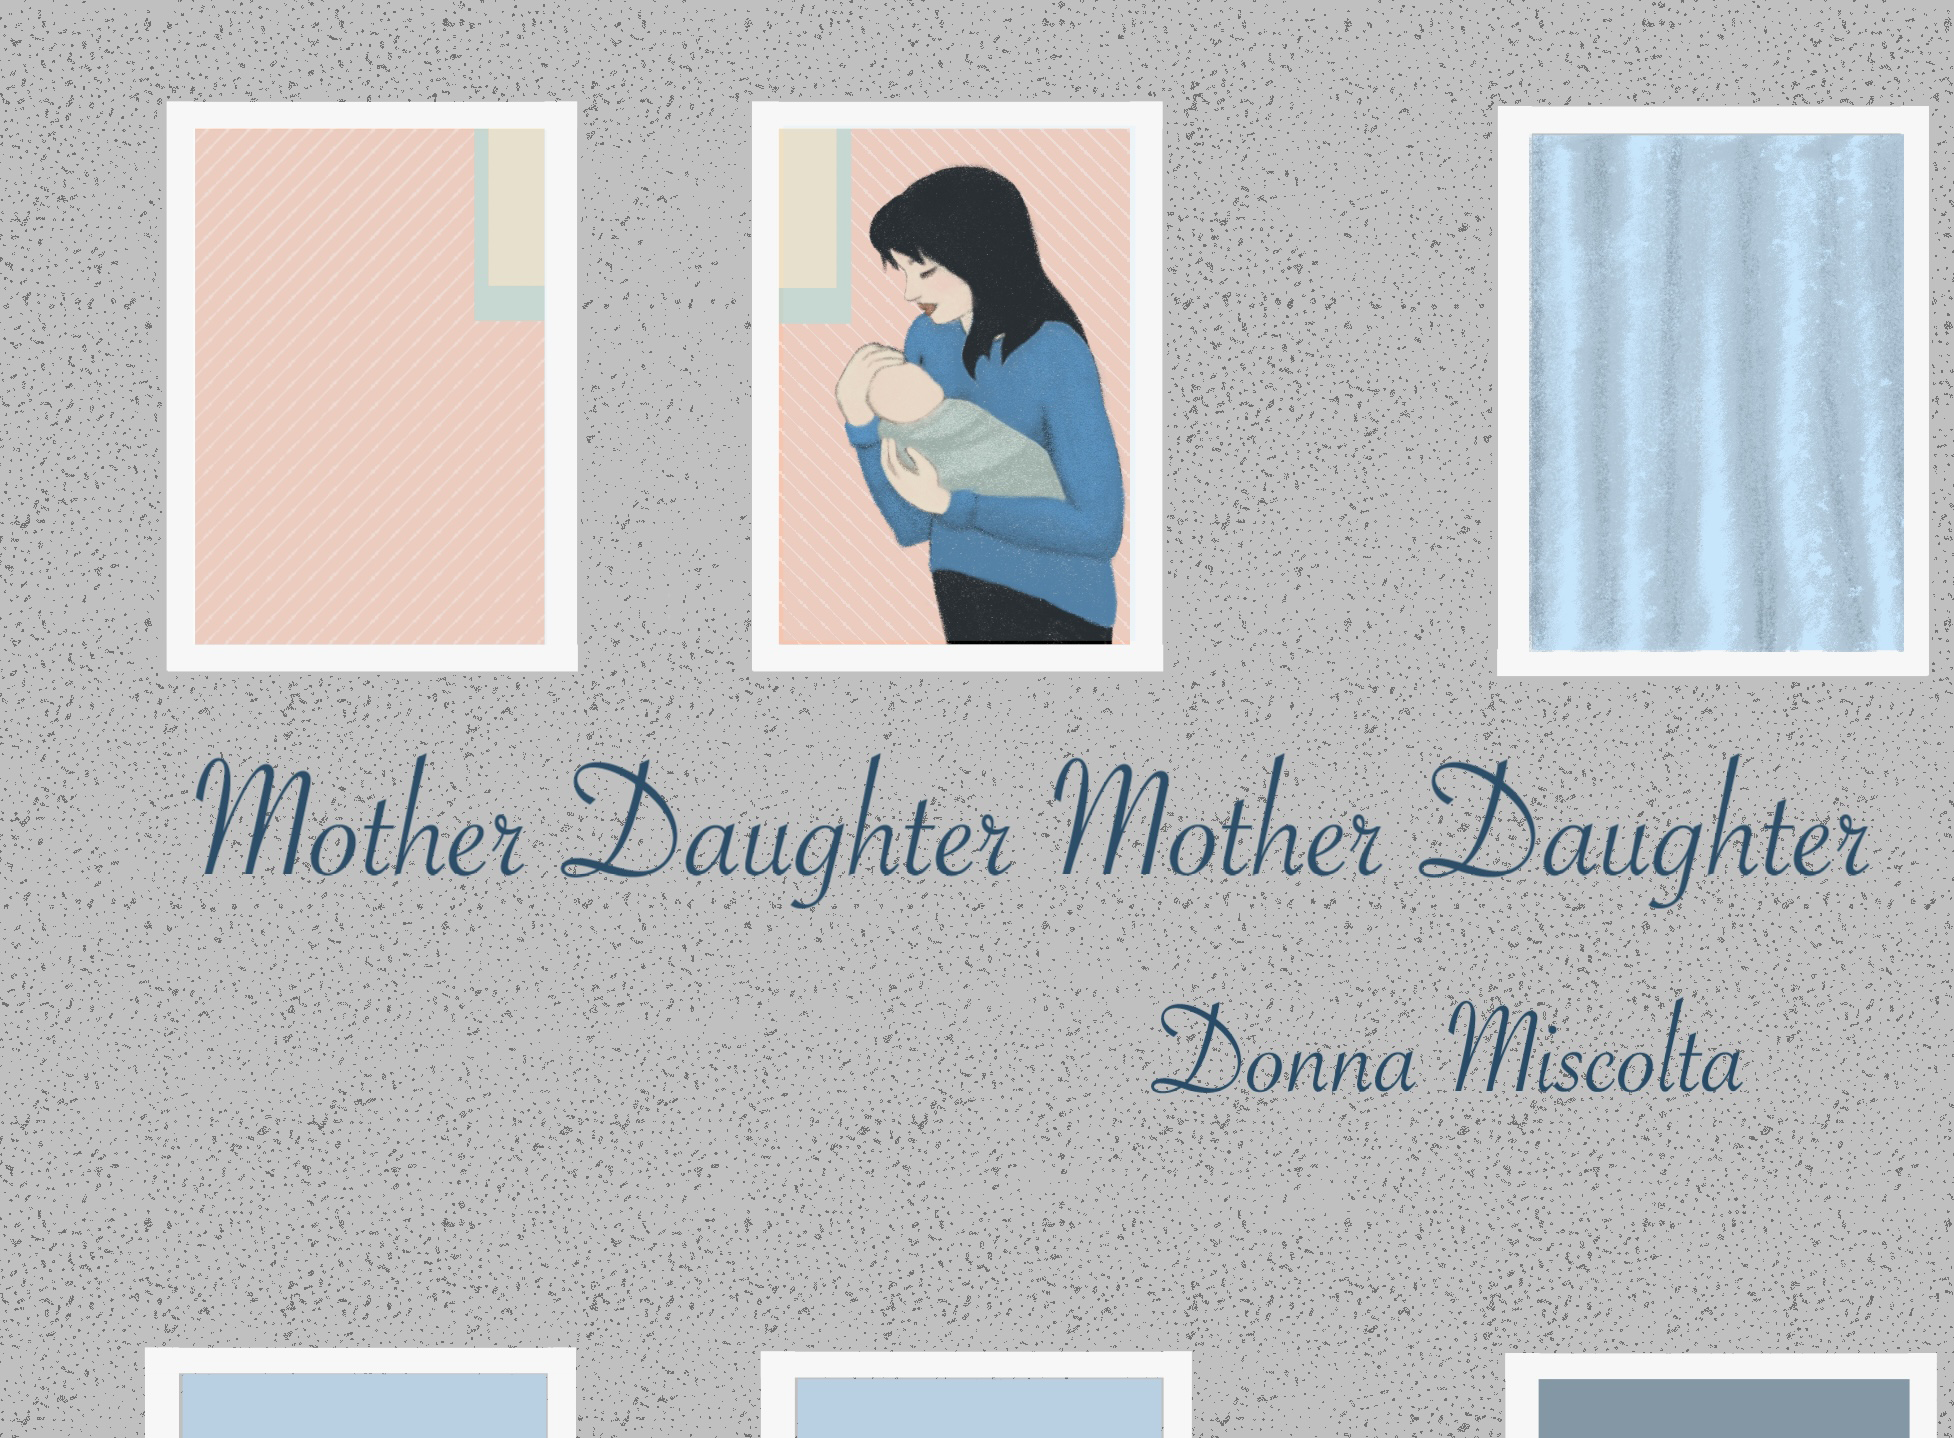 Mother Daughter Mother Daughter by Donna Miscolta